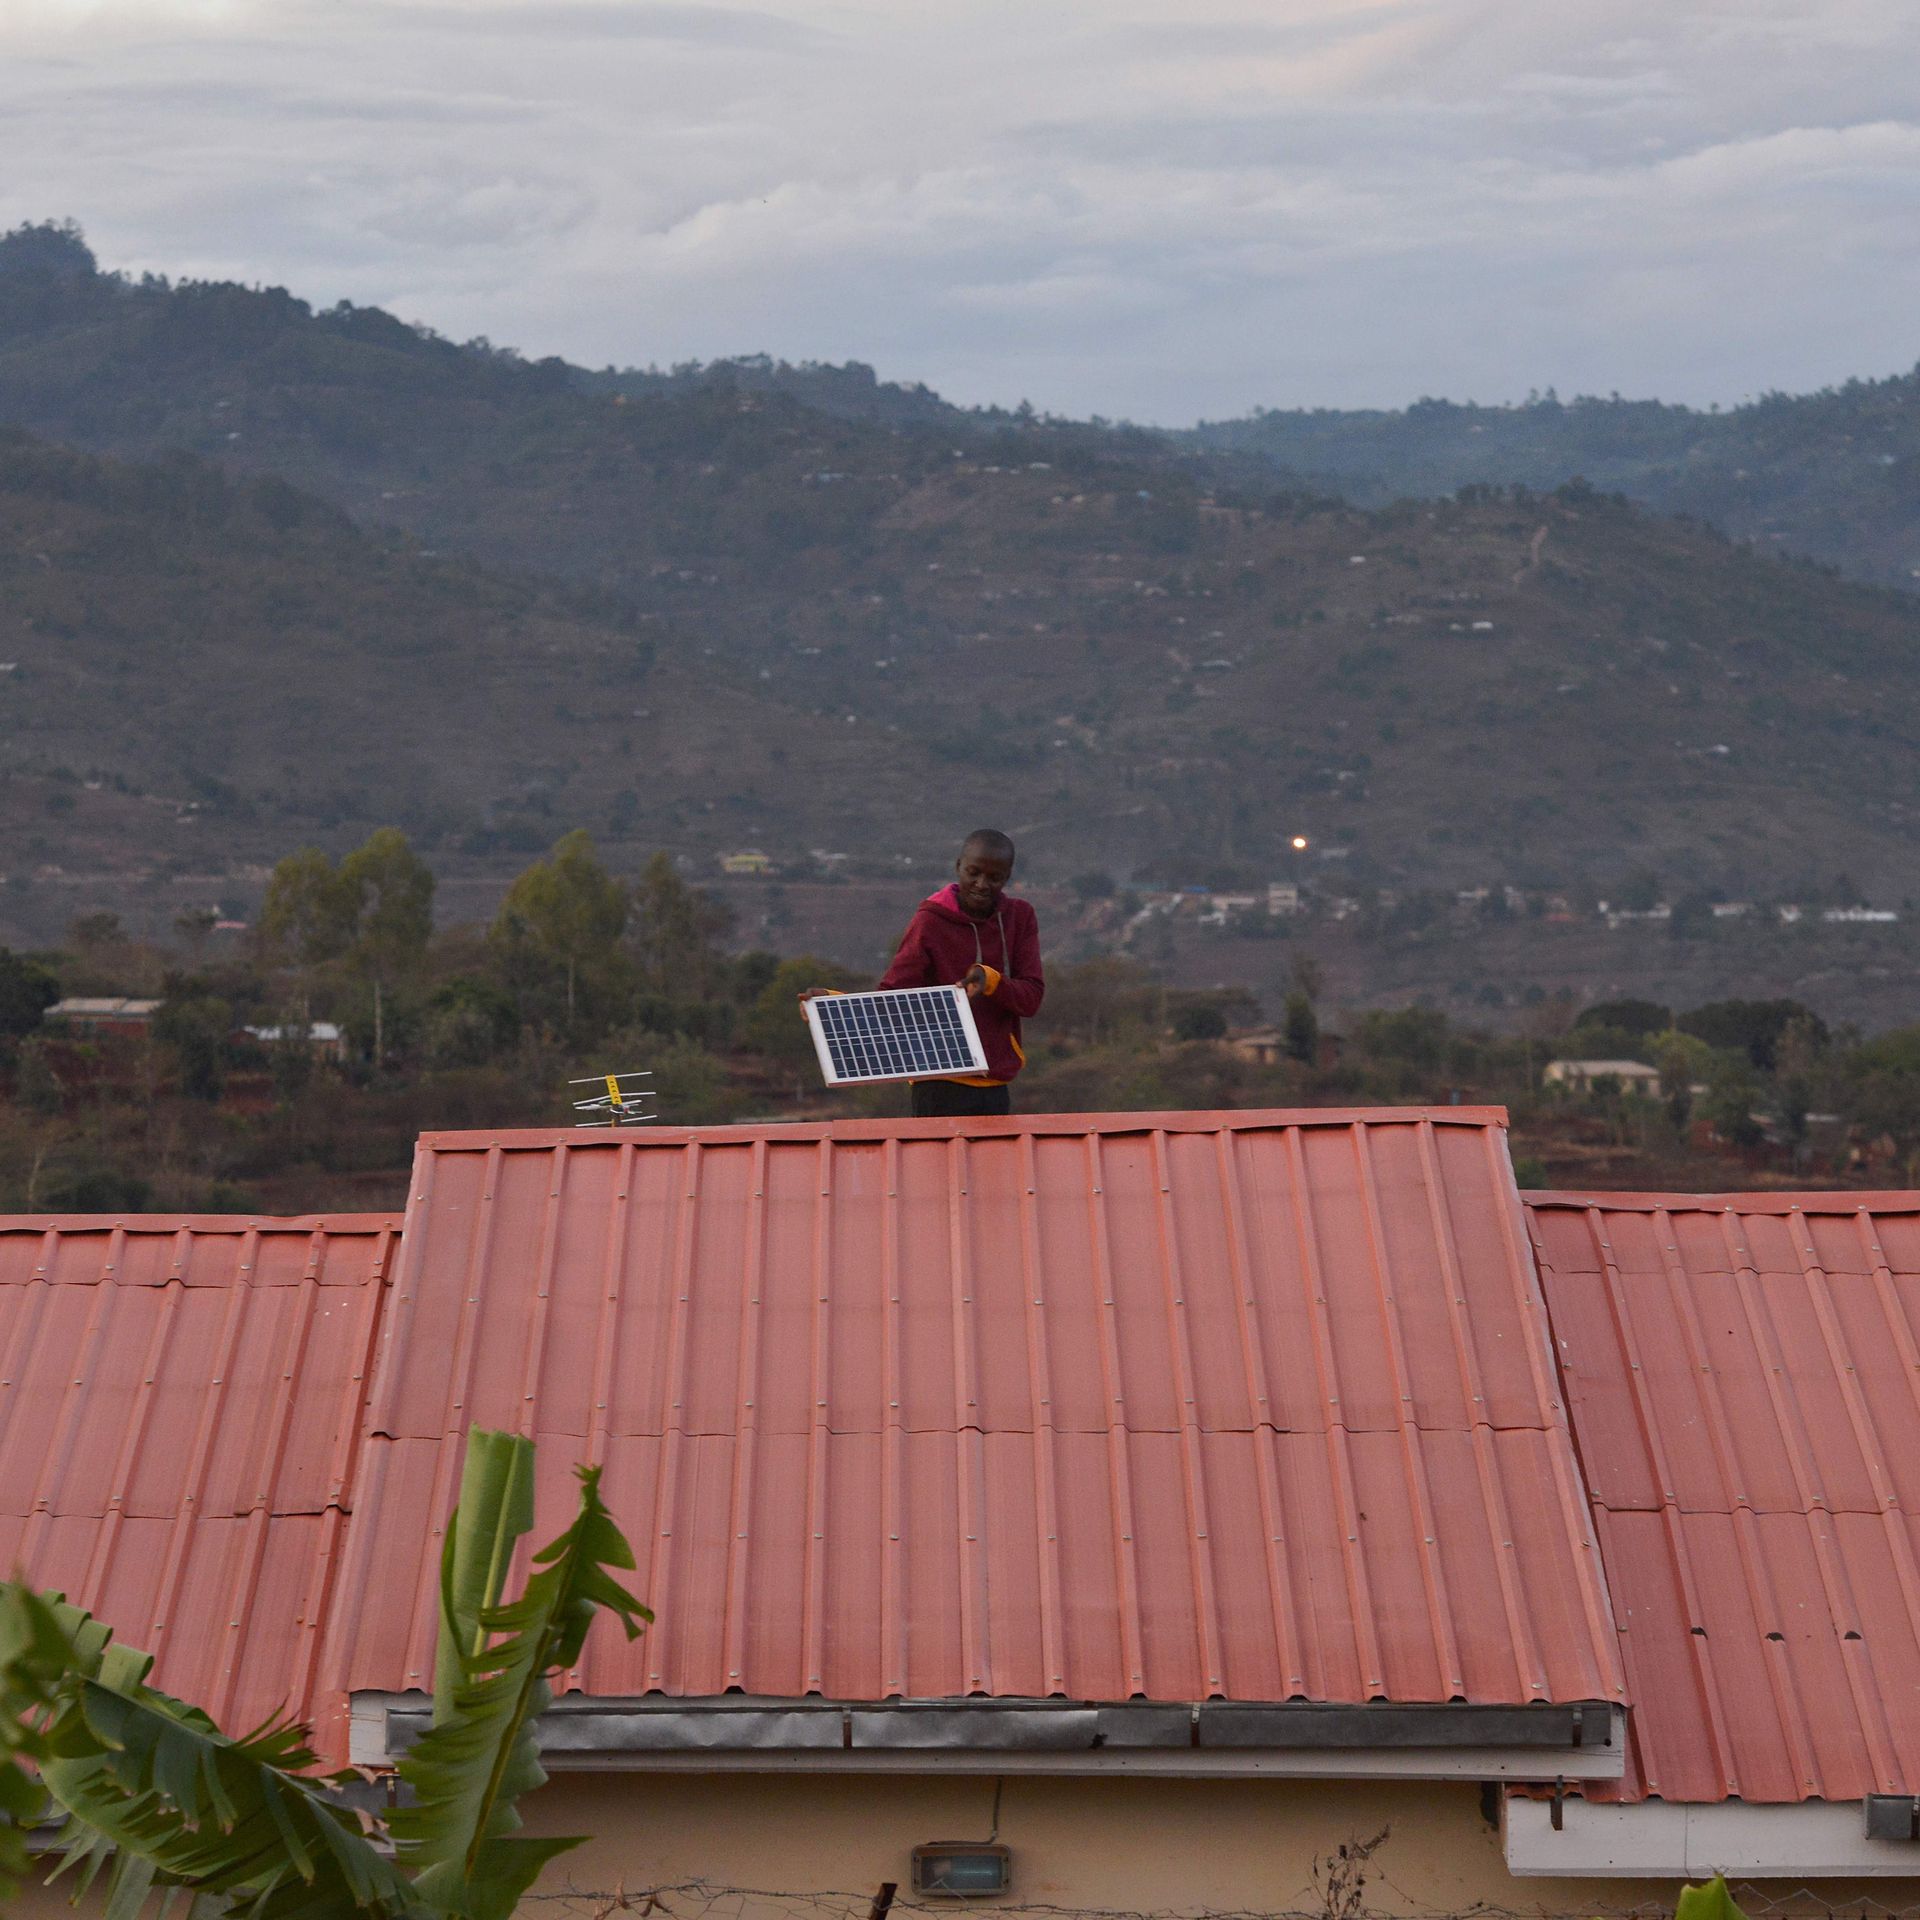 A man adjusts a solar panel on his roof at dusk in the villqge of Kwa-Mutisya in Machakos county, some 100 kilometres southeast of Nairobi, on November 16, 2016. 